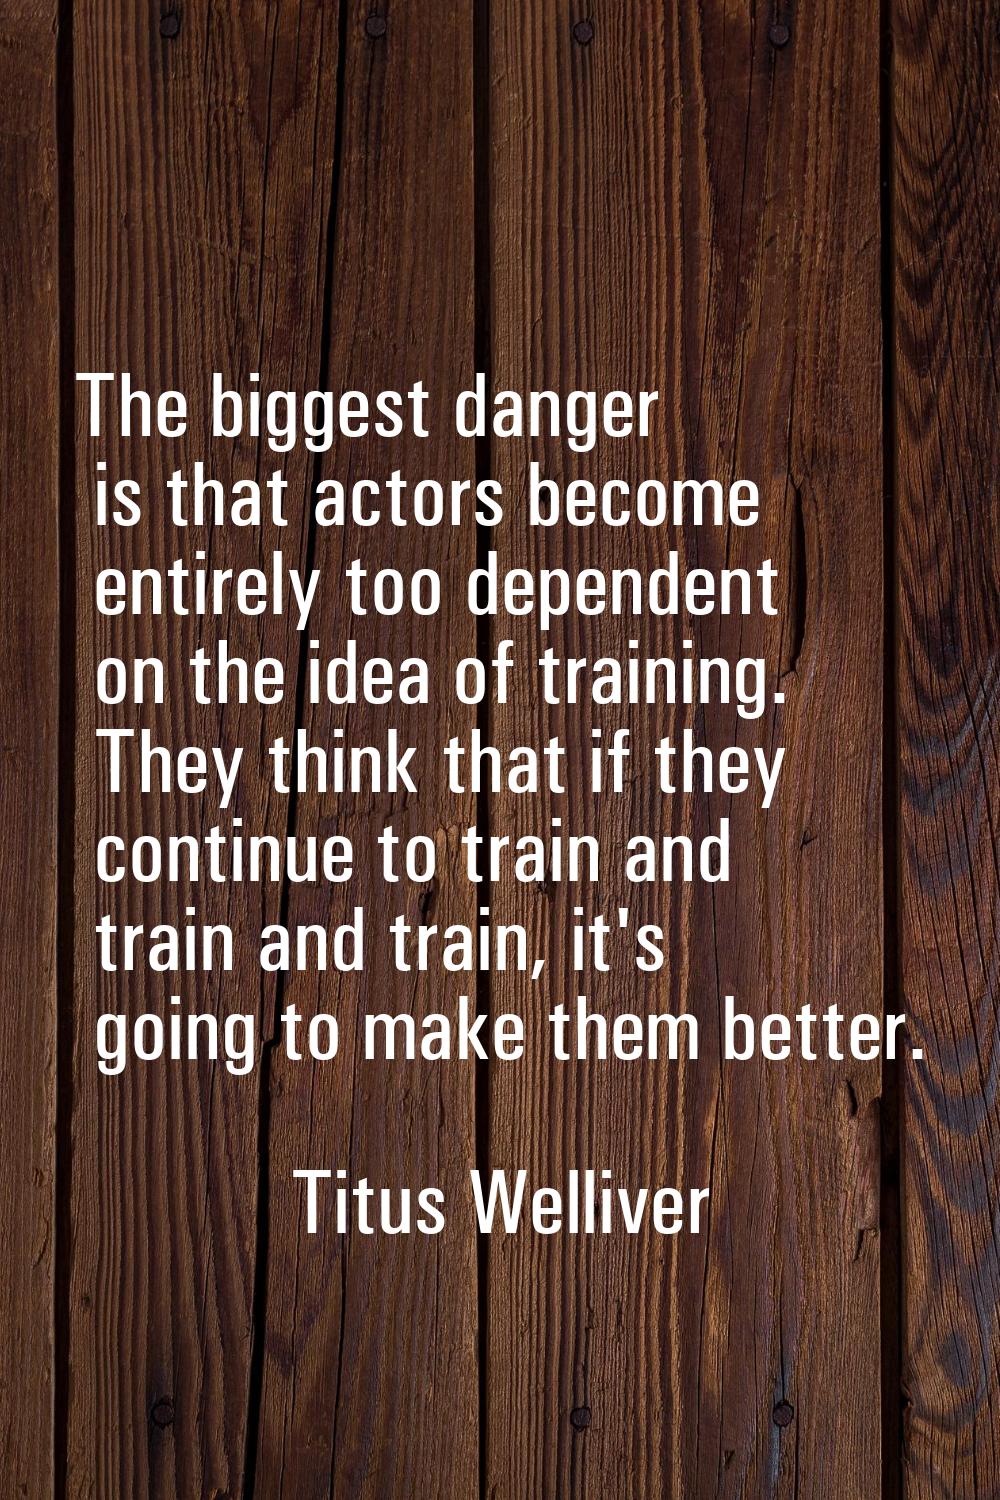 The biggest danger is that actors become entirely too dependent on the idea of training. They think